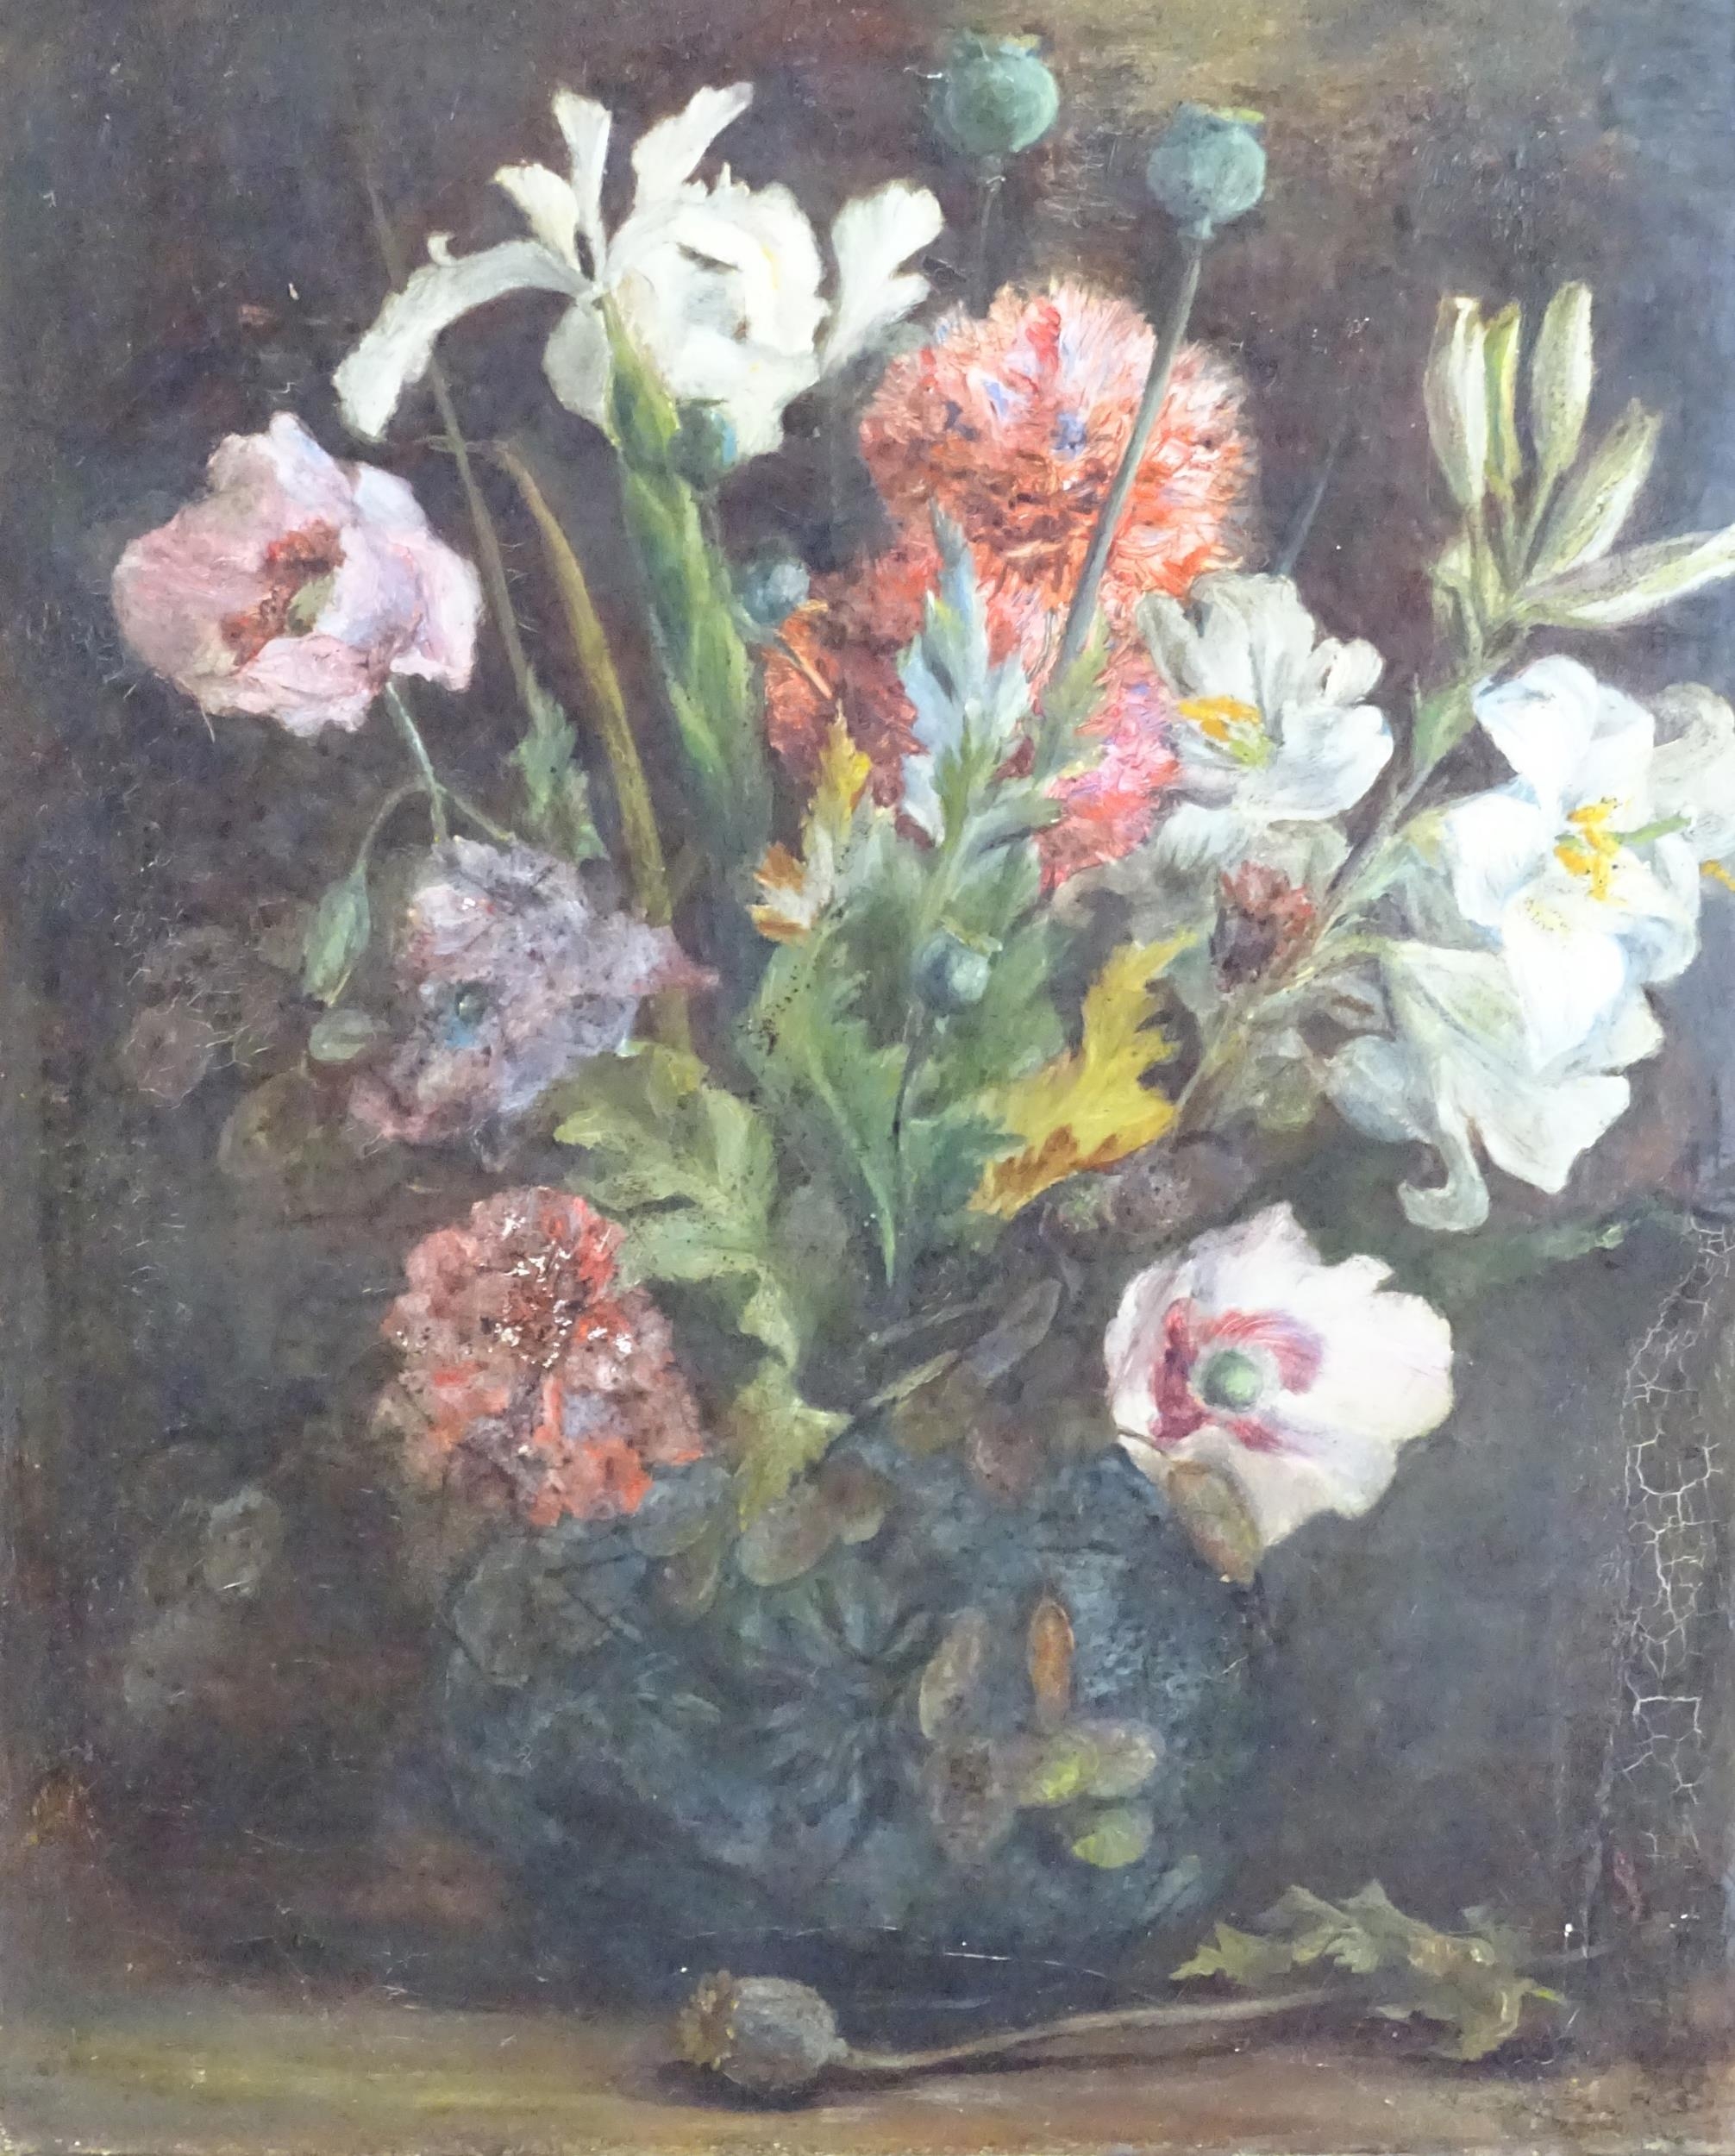 Mary A. Clayton, Late 19th / early 20th century, Oil on canvas, A still life study with flowers in a - Image 3 of 4